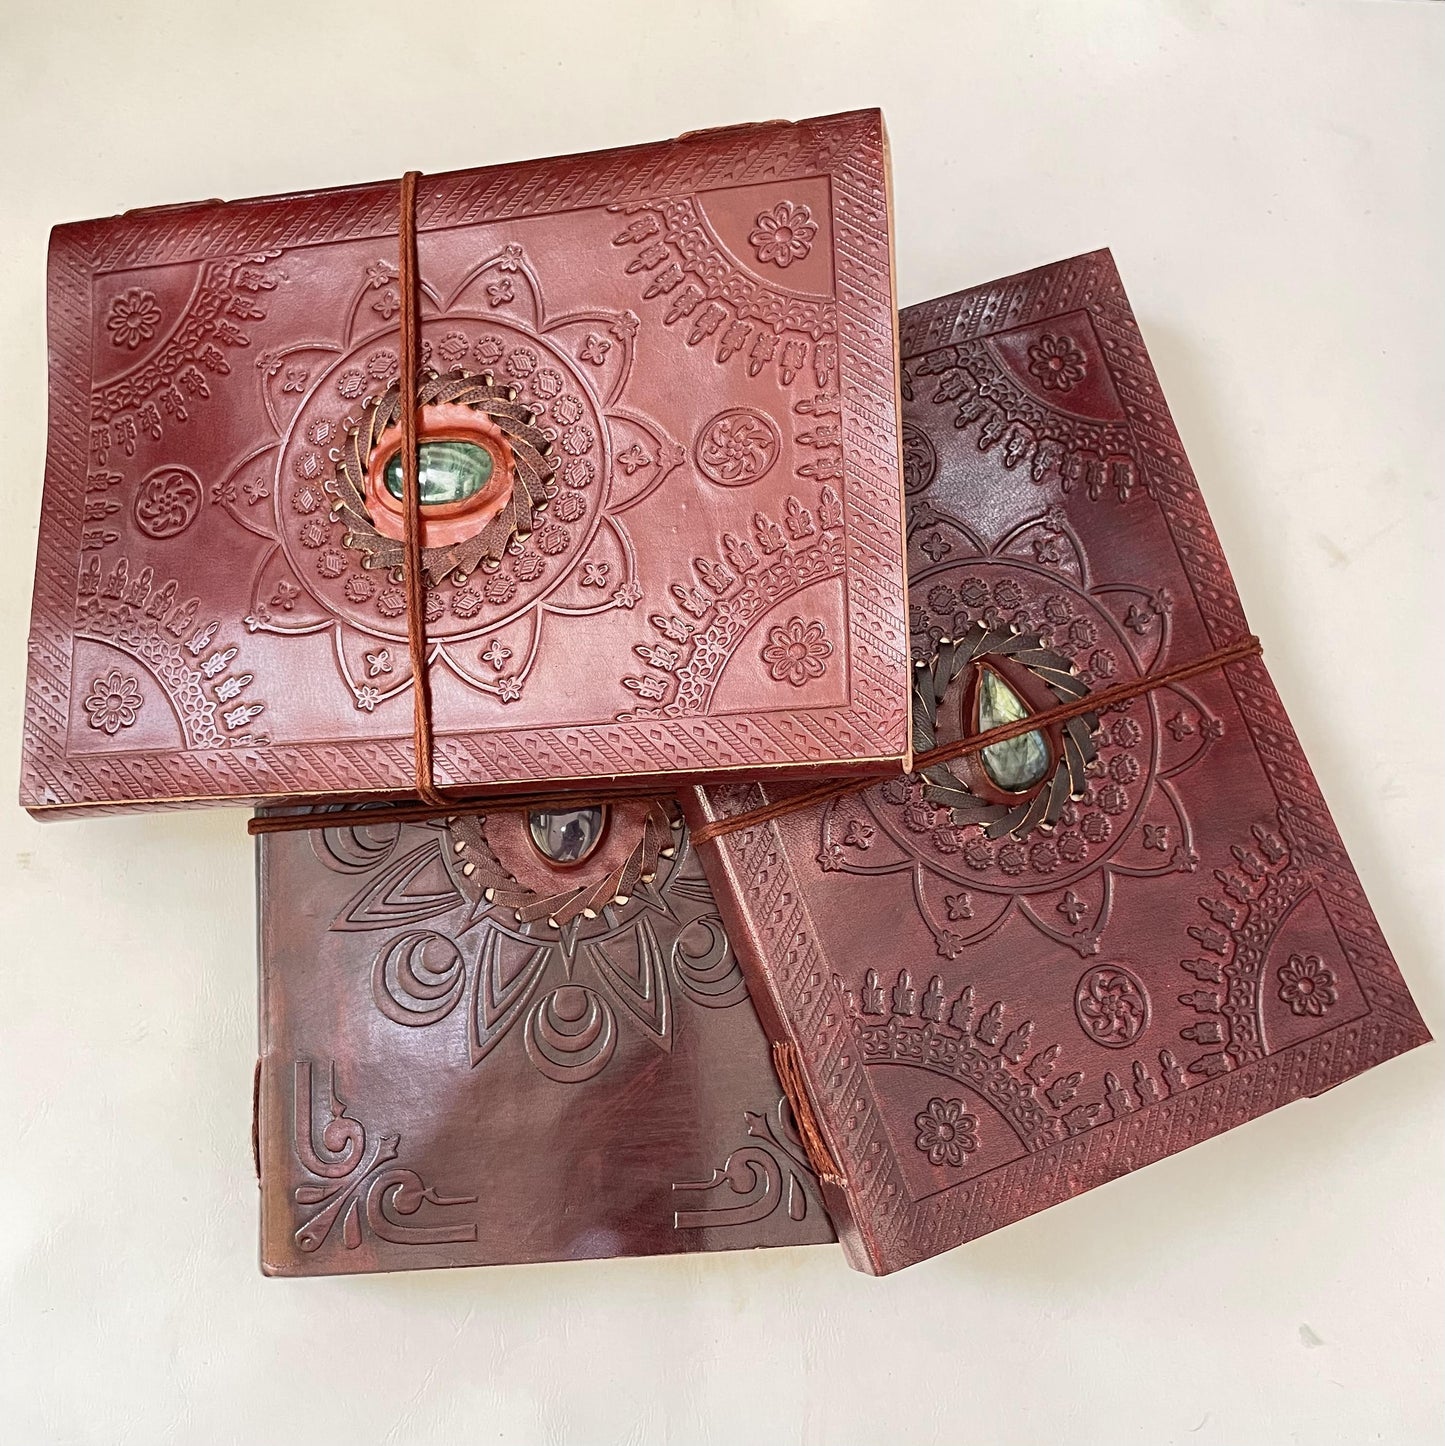 Embellished Leather Diary in a Compact 10x13 Inch Size" With Natural Gemstone